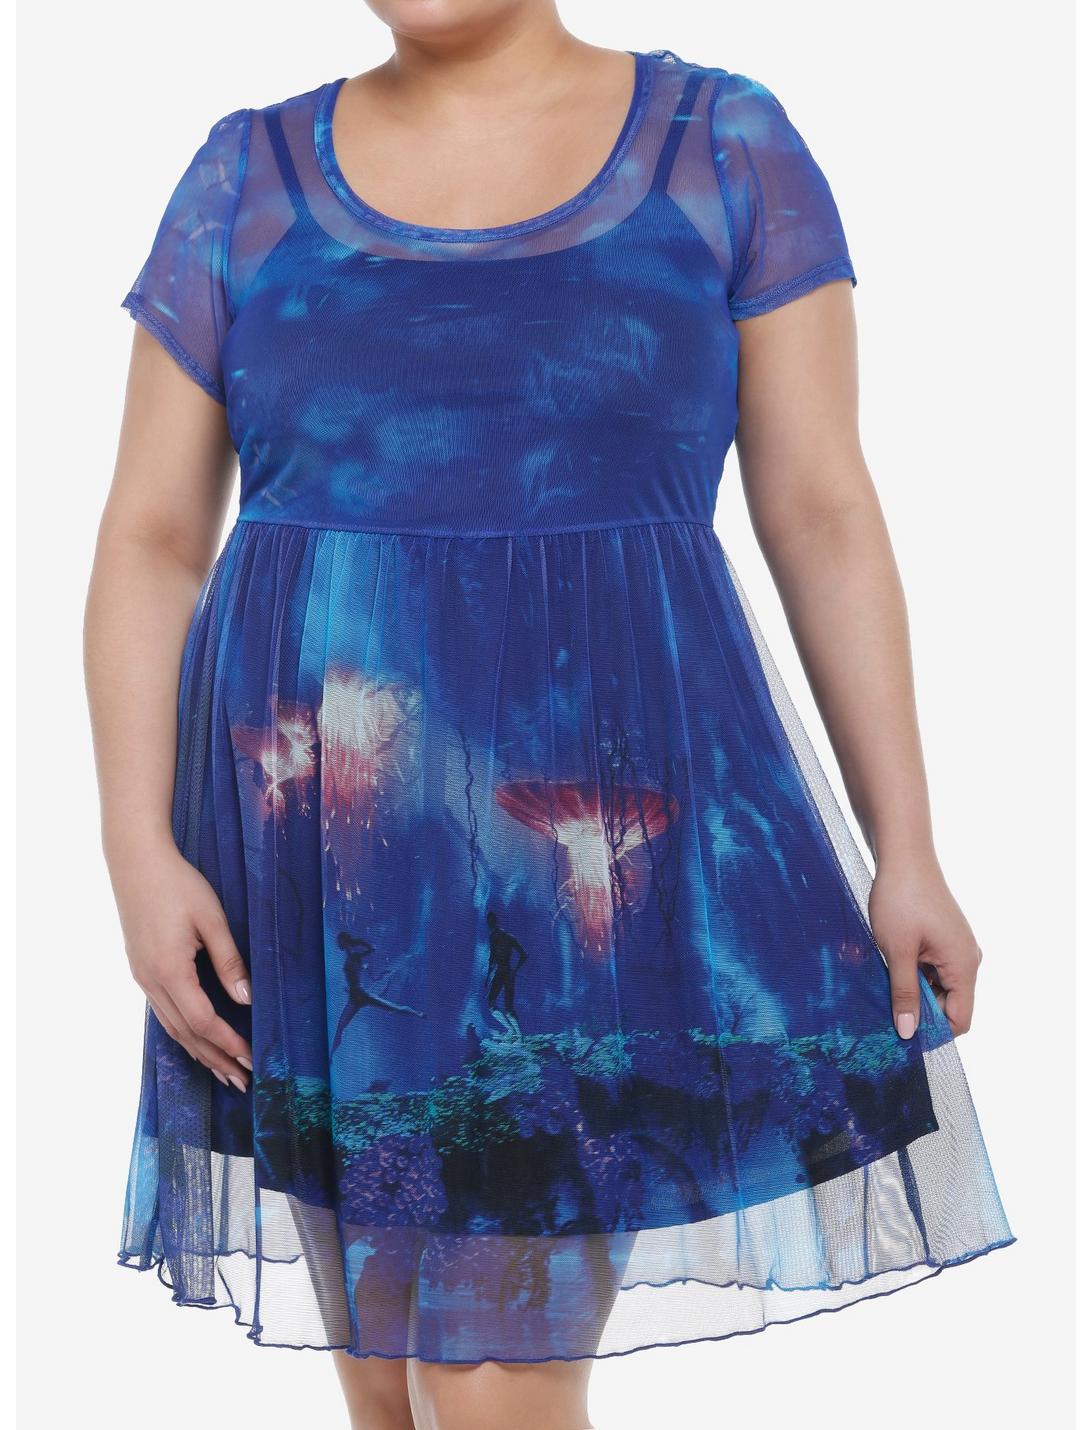 Avatar: The Way Of Water Mesh Dress Plus Size, MULTI, hi-res